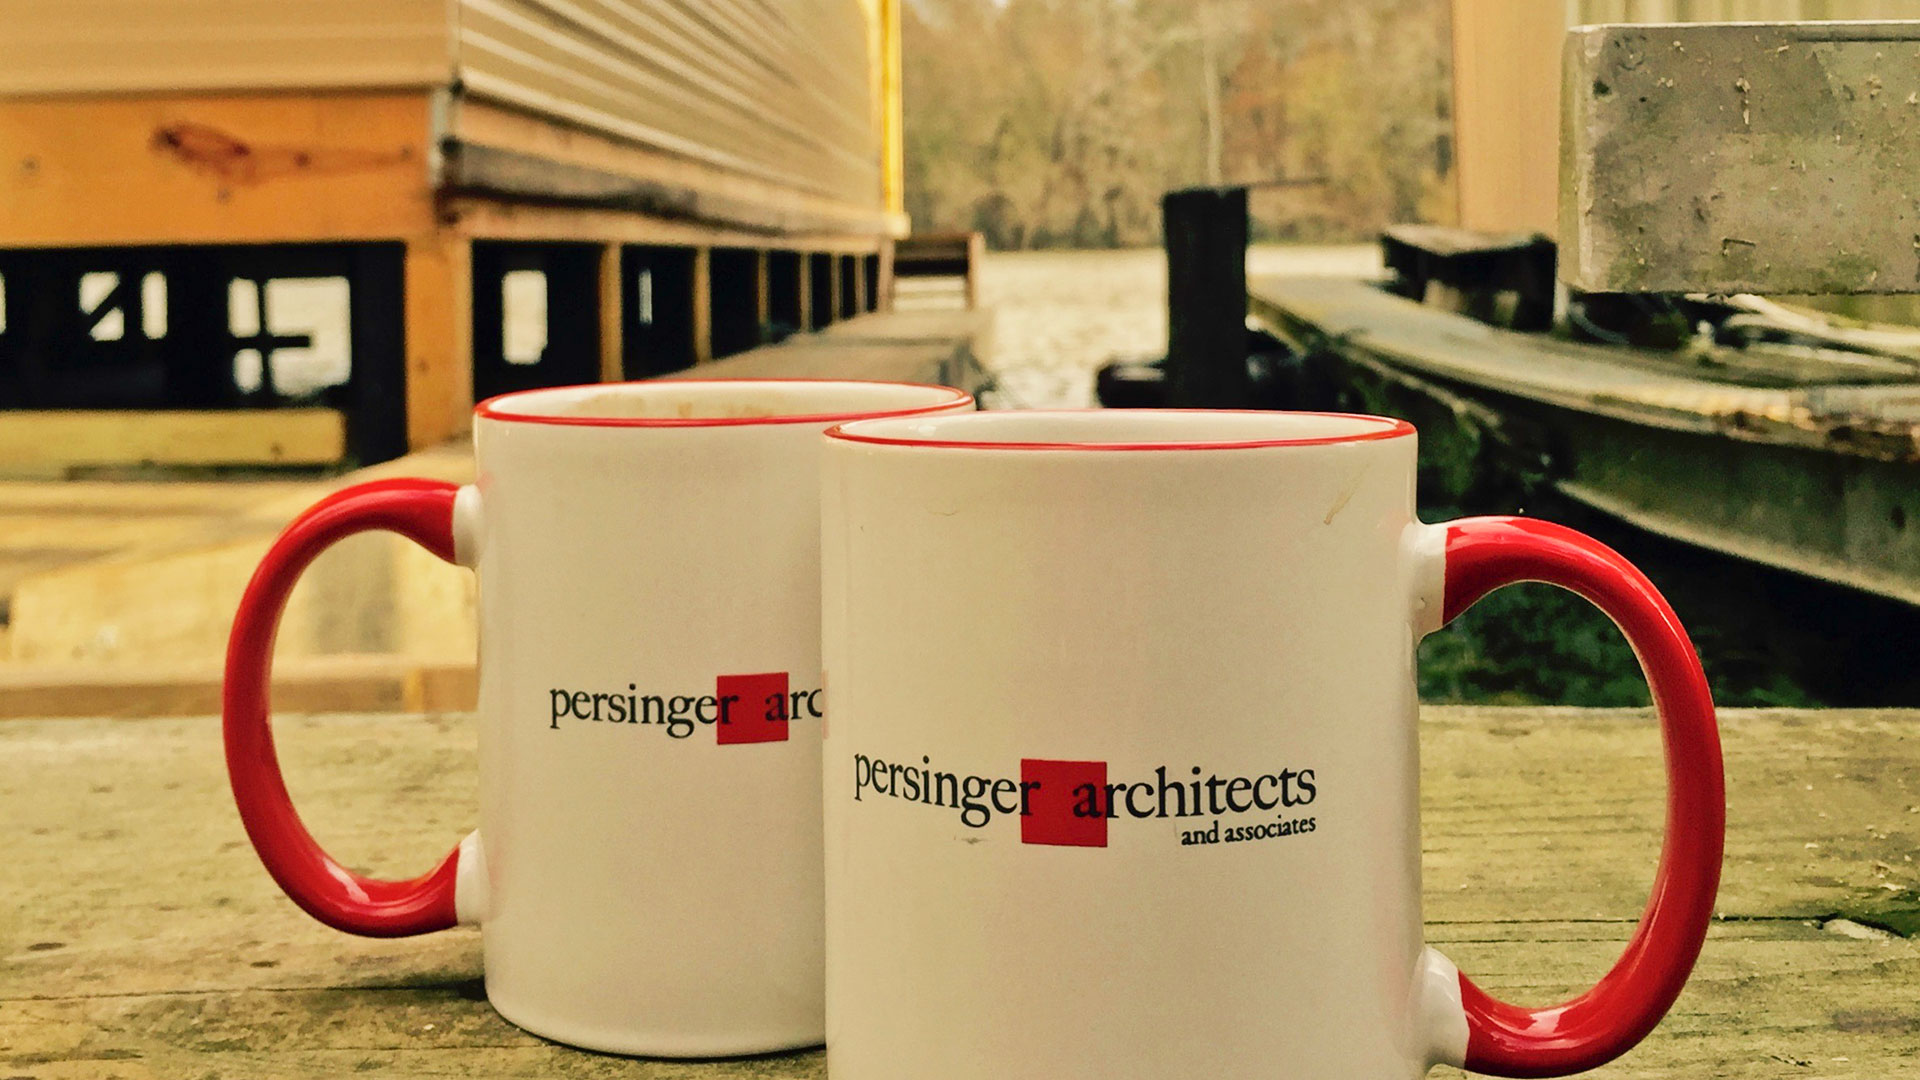 Pair of white mugs with persinger logo, red handles and lip, on a wooden dock with river and forest behind.